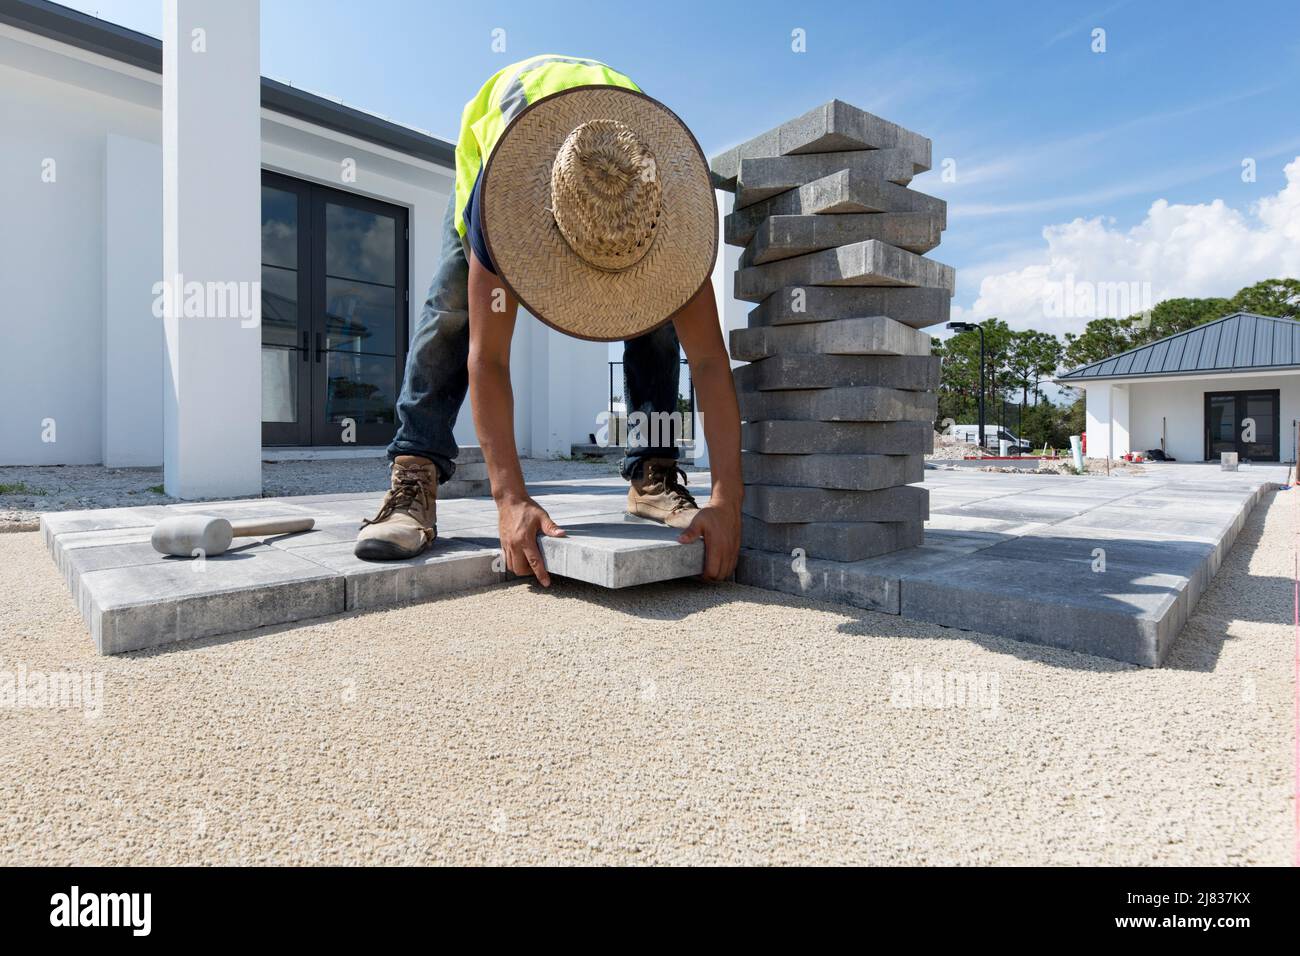 Walkway tiles, bricks or pavers are being installed on a property in. Naples, Florida between a few buildings and some sport installations. Stock Photo